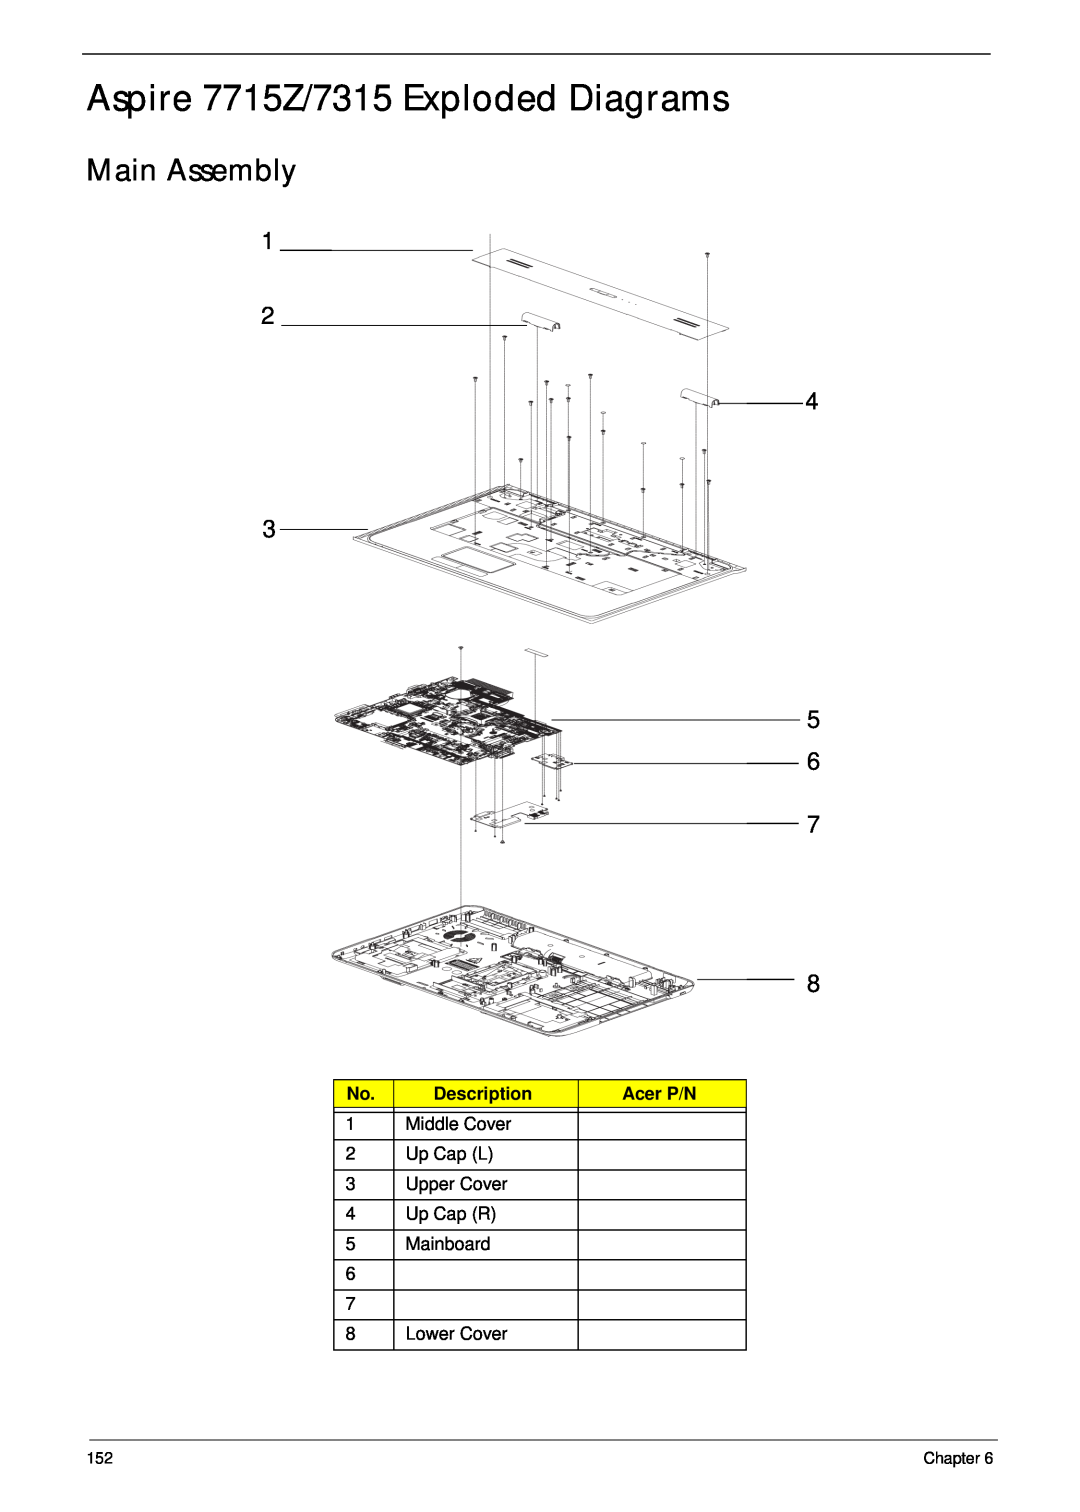 Acer manual Aspire 7715Z/7315 Exploded Diagrams, Main Assembly, Description, Acer P/N, Chapter 